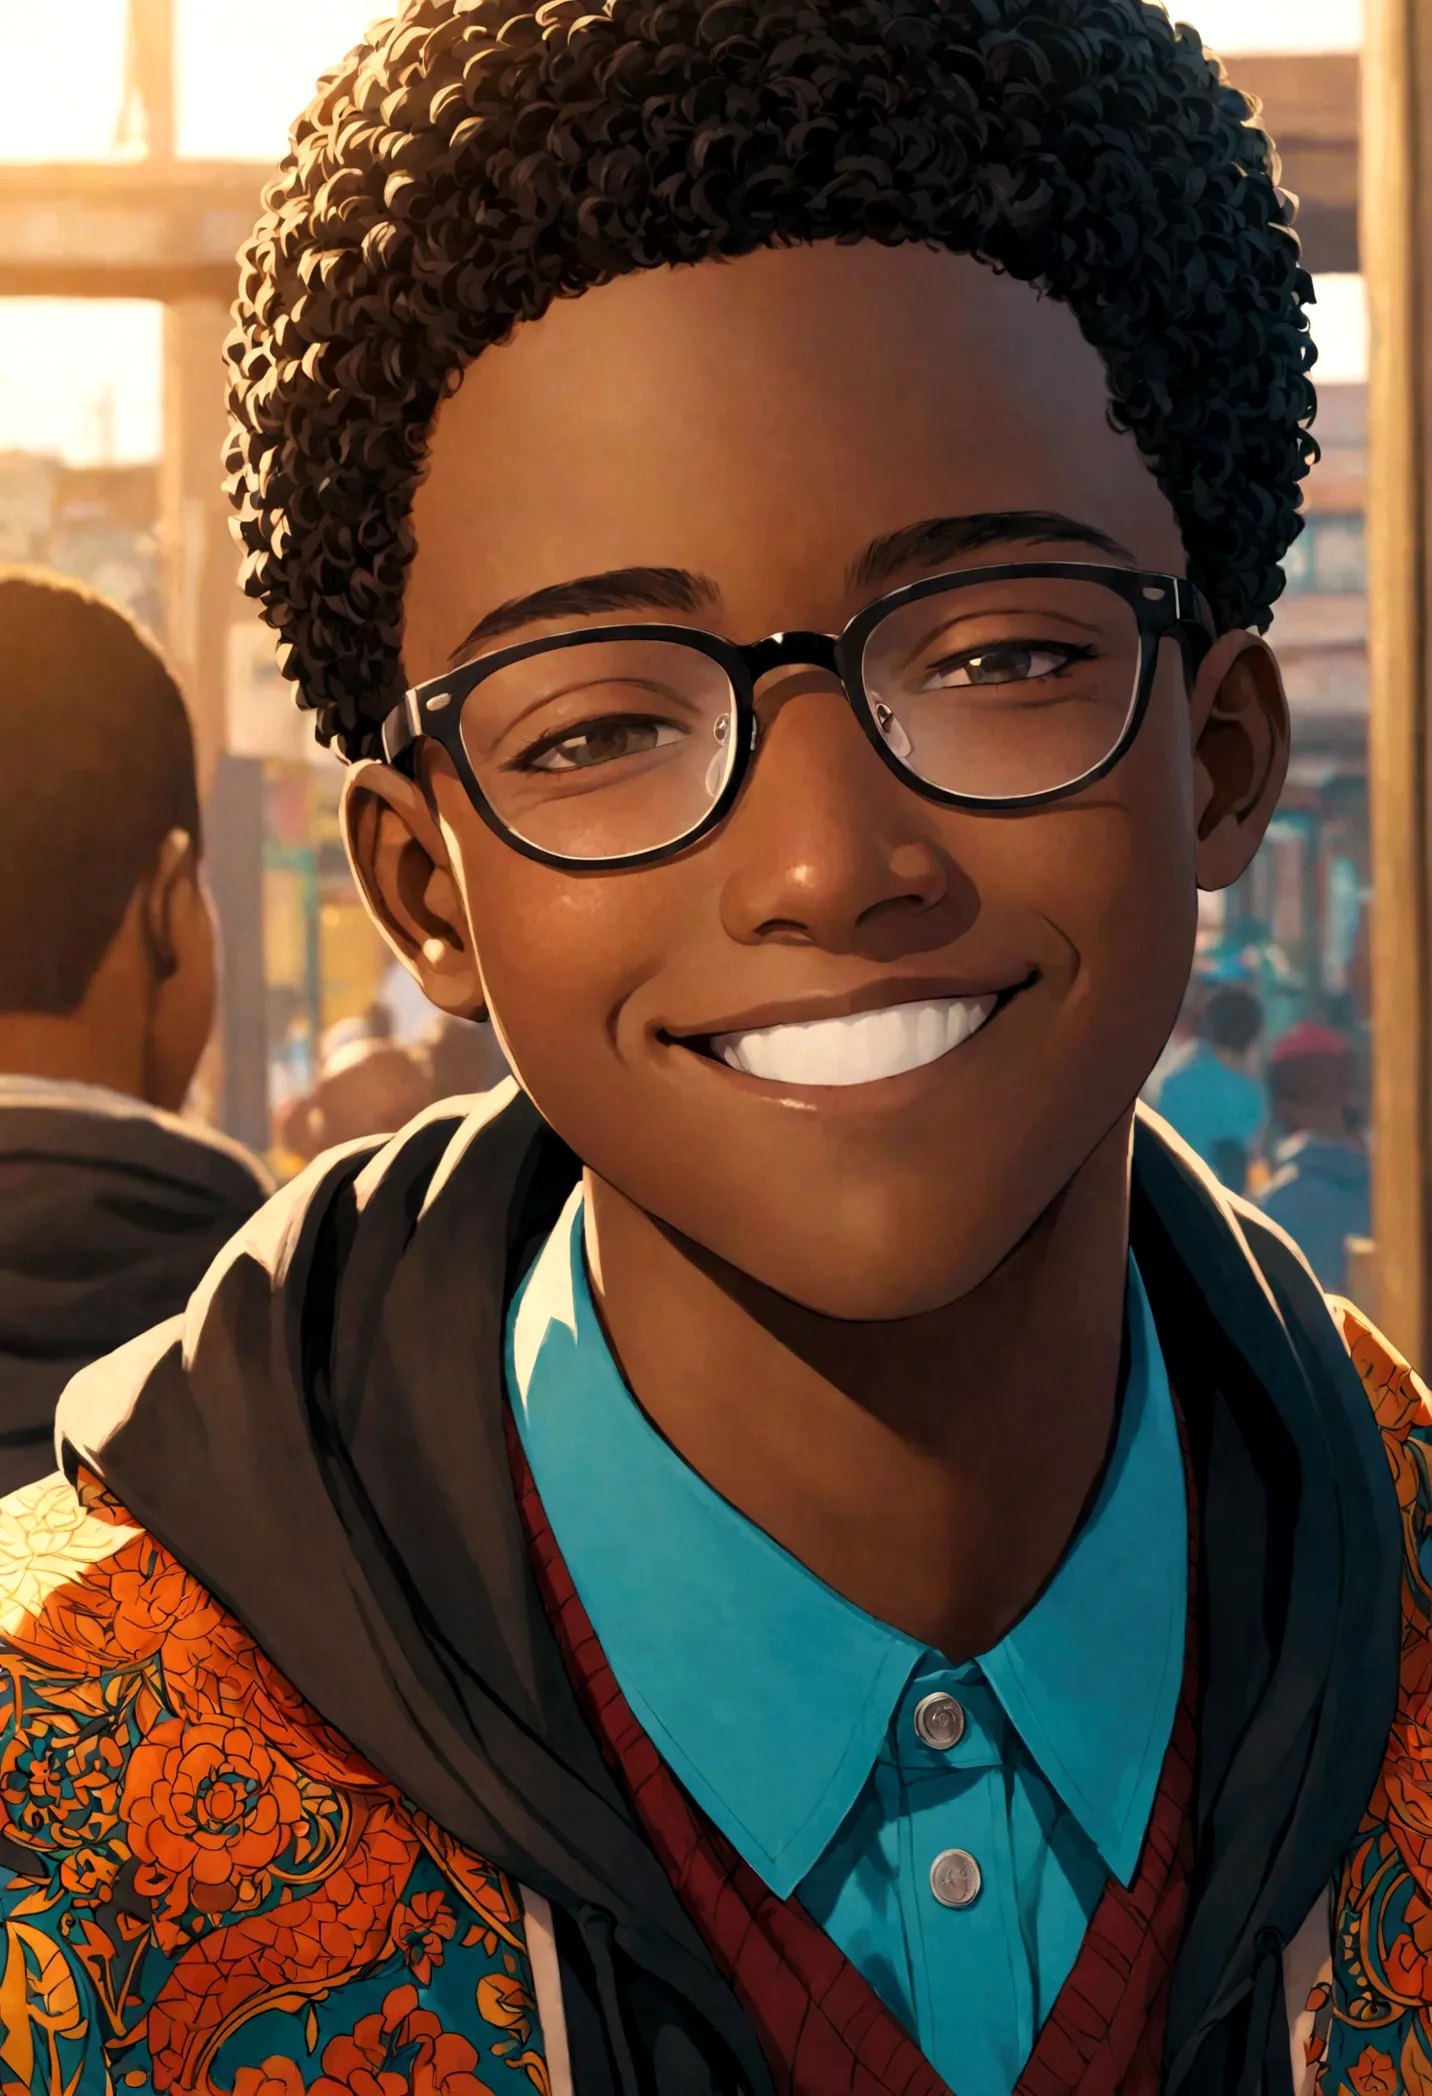 
black boy with glasses smiling